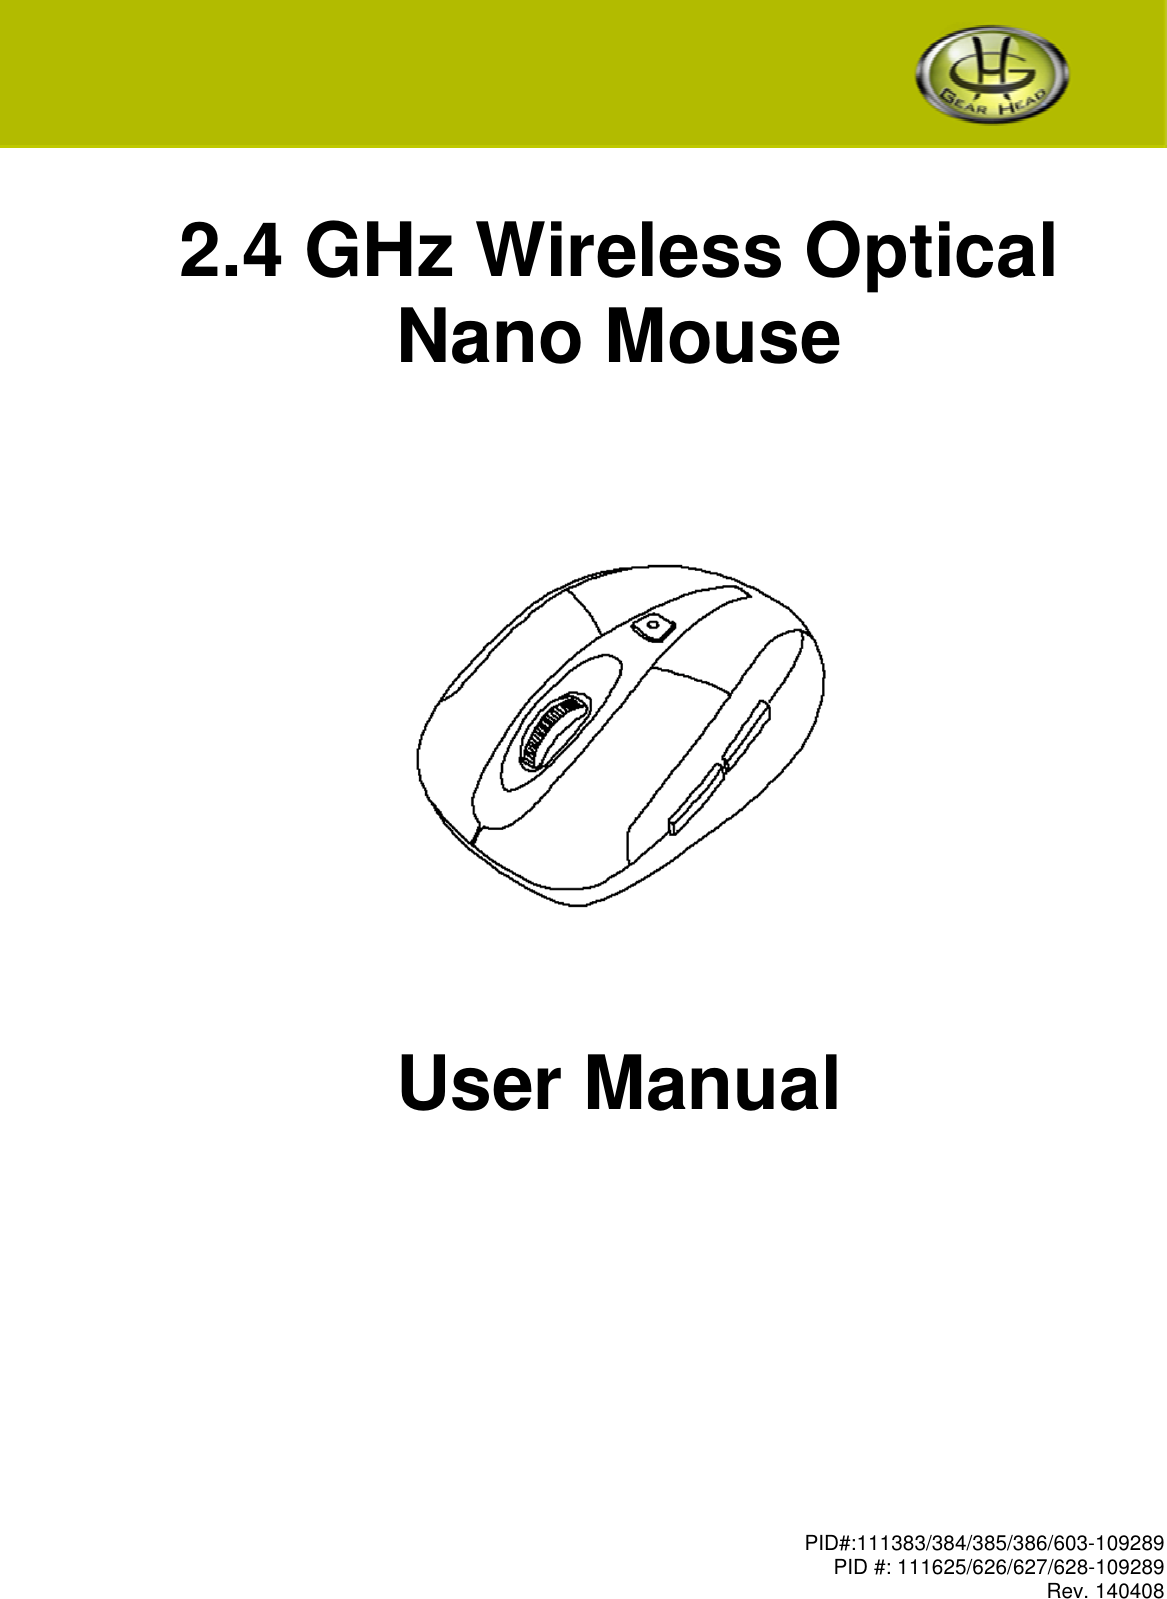 PID#:111383/384/385/386/603-109289  PID #: 111625/626/627/628-109289 Rev. 140408    2.4 GHz Wireless Optical  Nano Mouse                             User Manual 